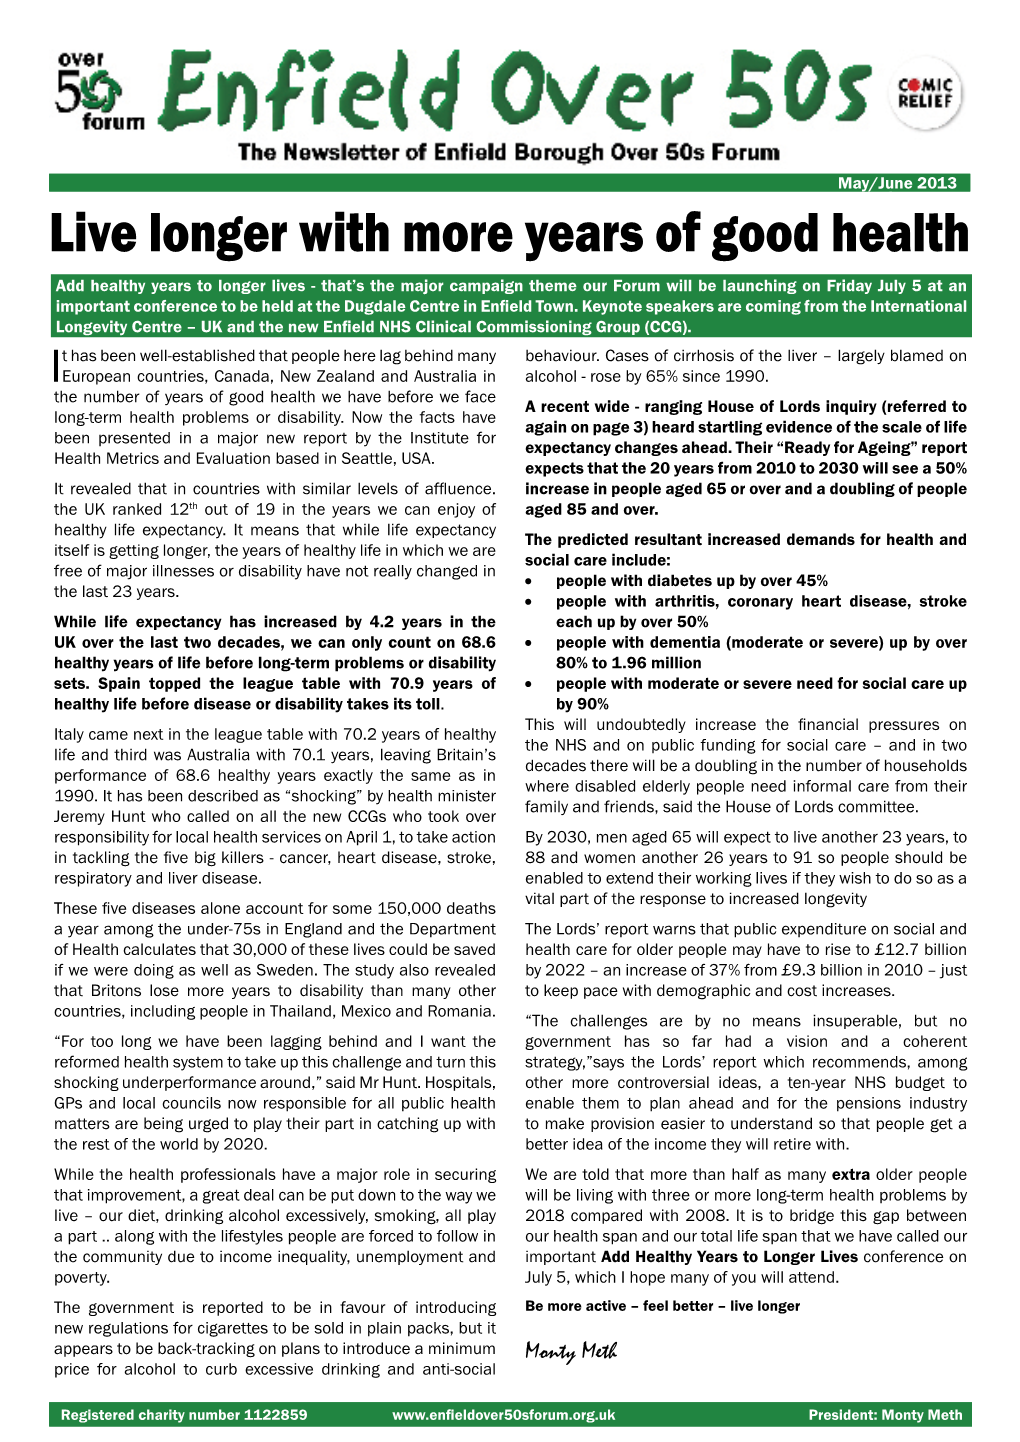 Live Longer with More Years of Good Health